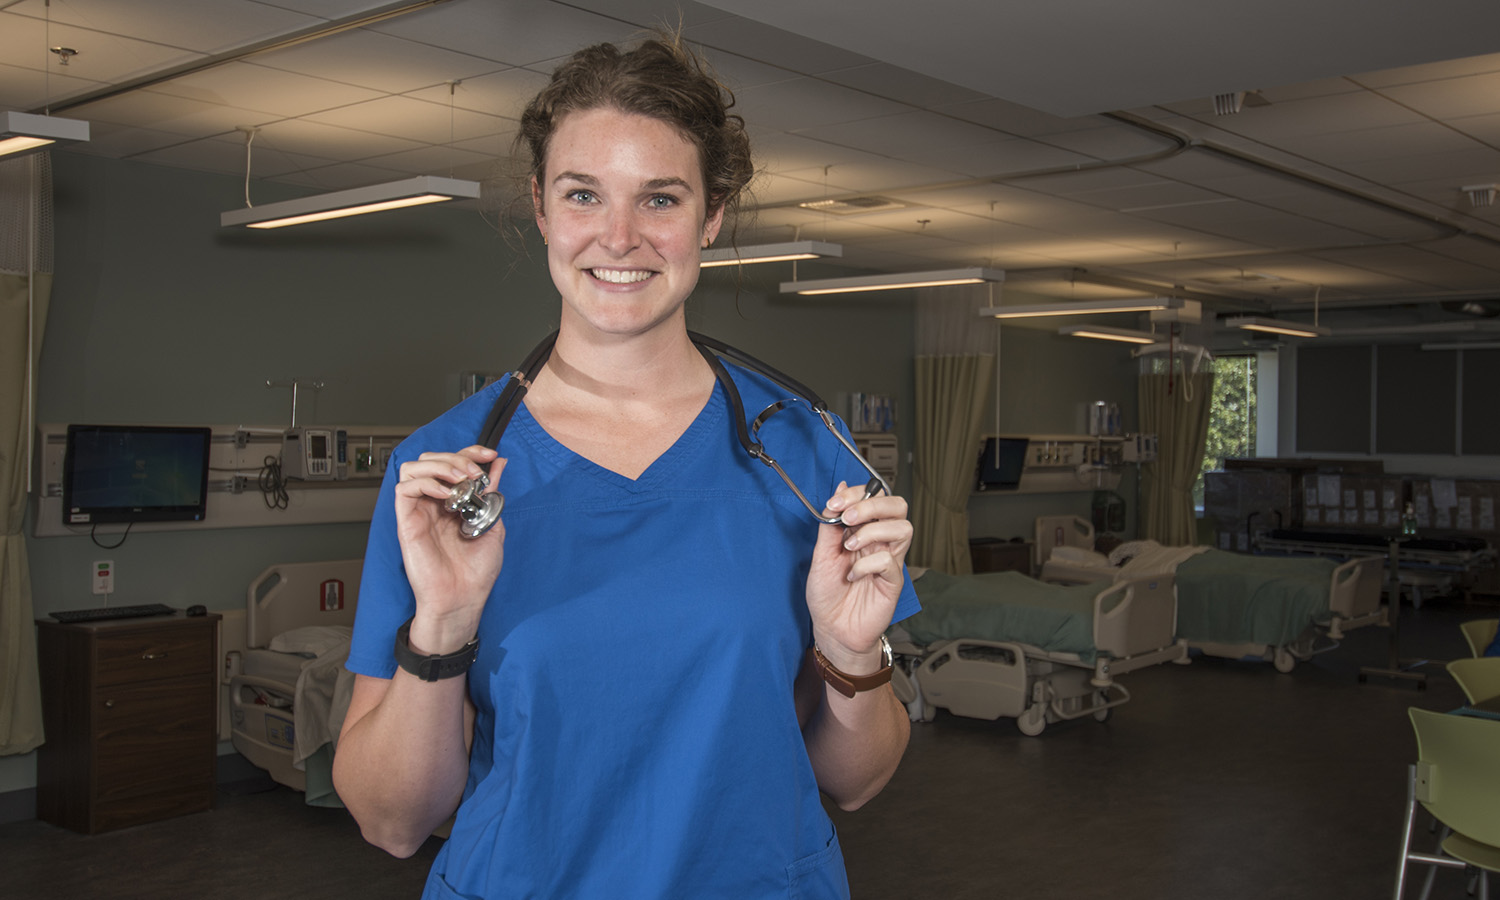 Nursing student at Seattle Central Health Education Center